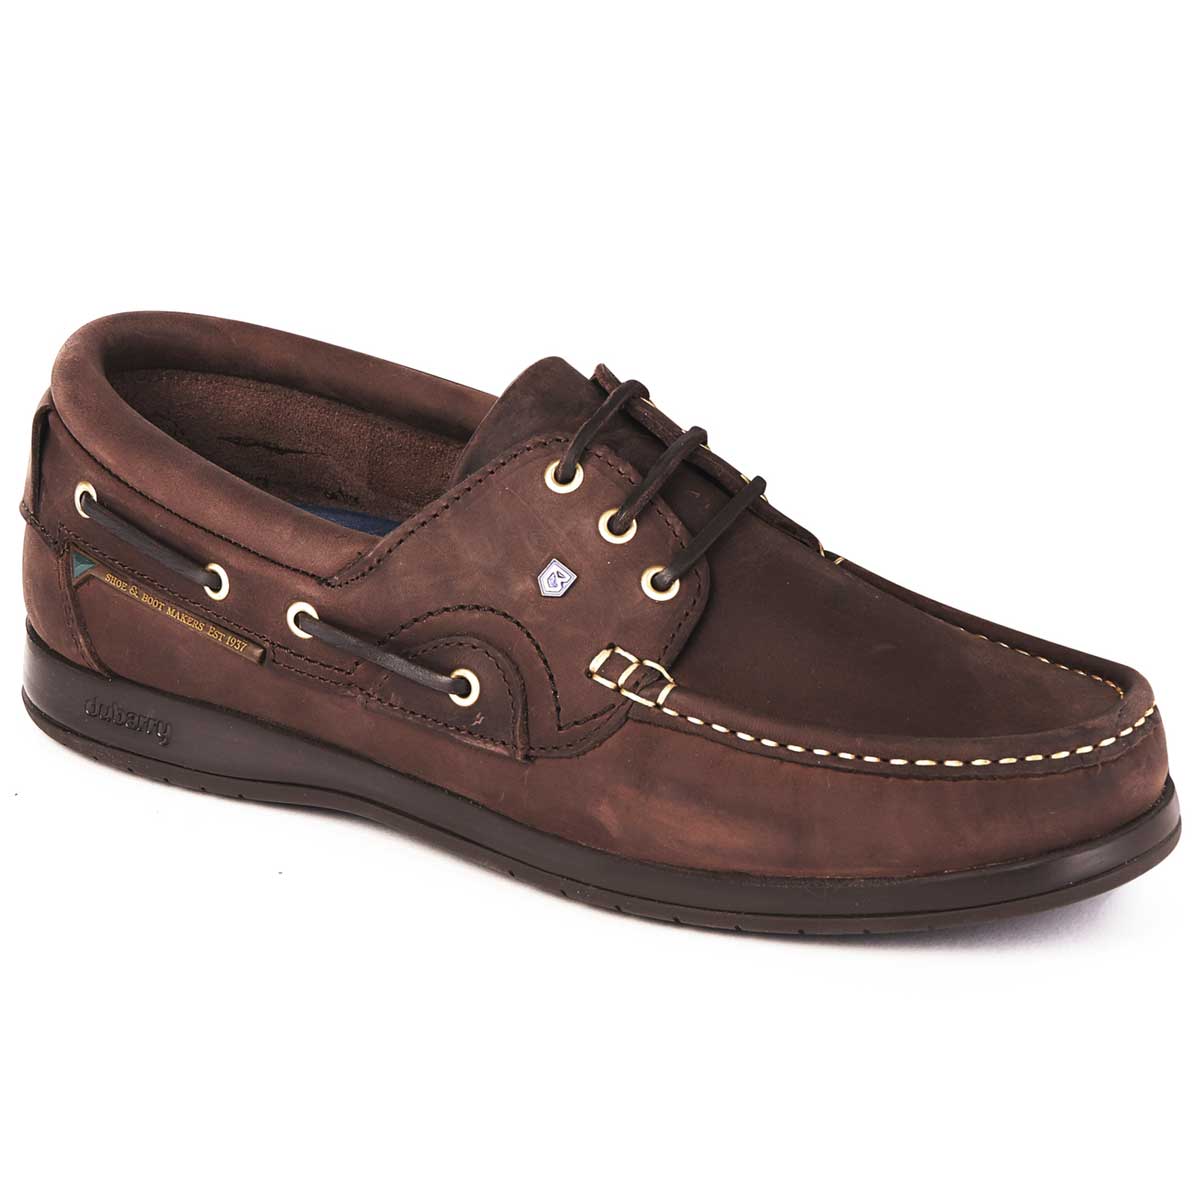 Men's Deck Shoes – A Farley Country Attire